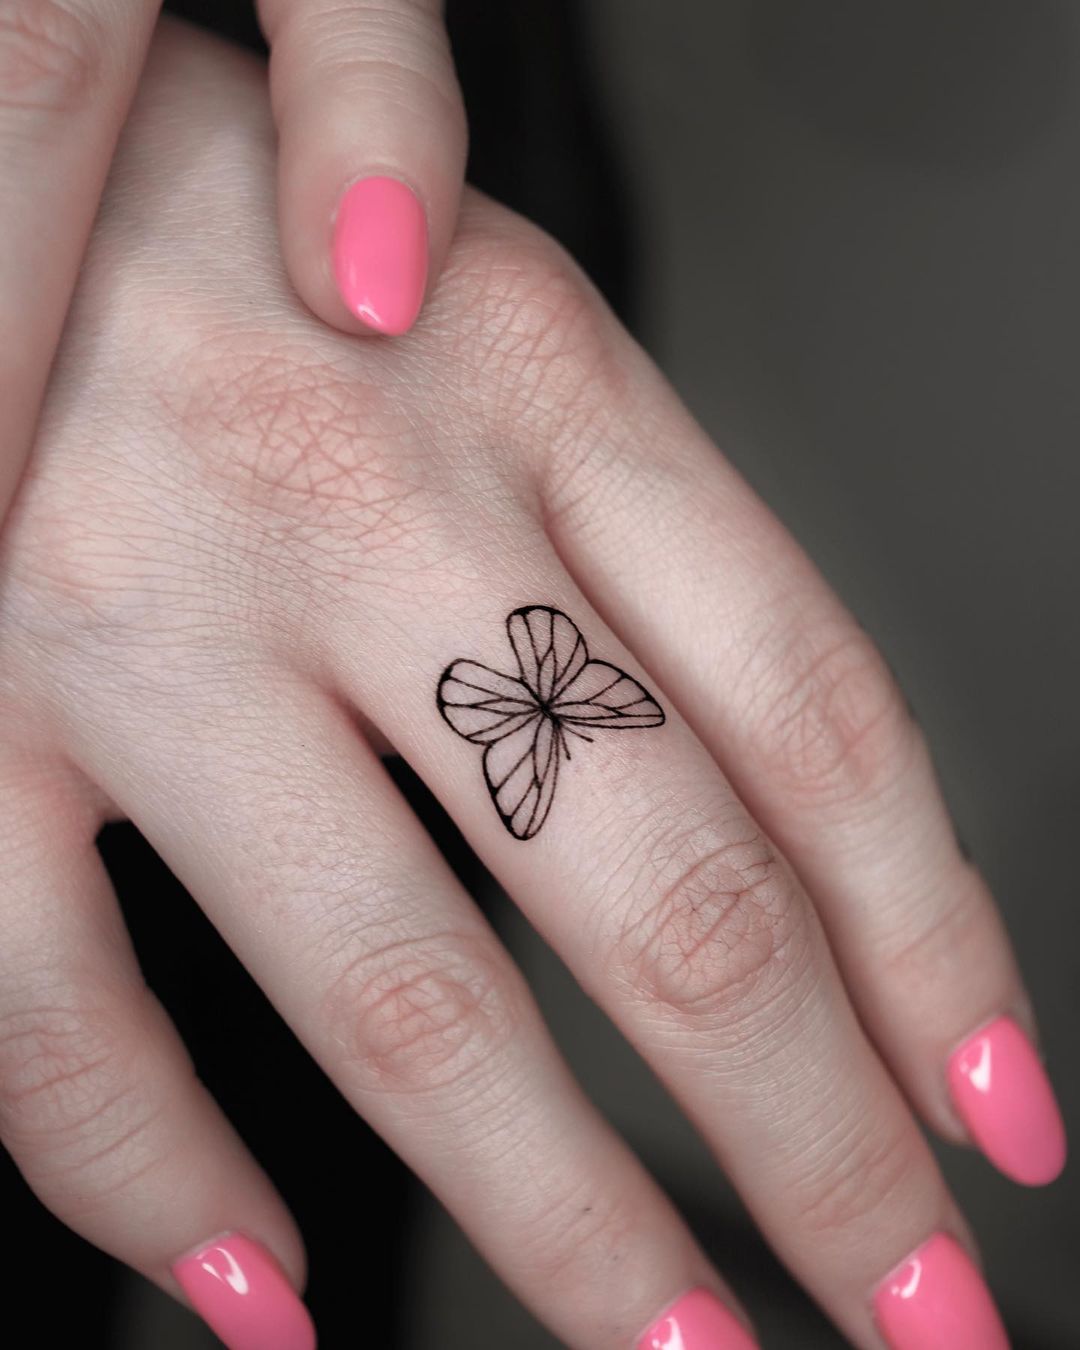 Black Butterfly Tattoo on Middle Finger